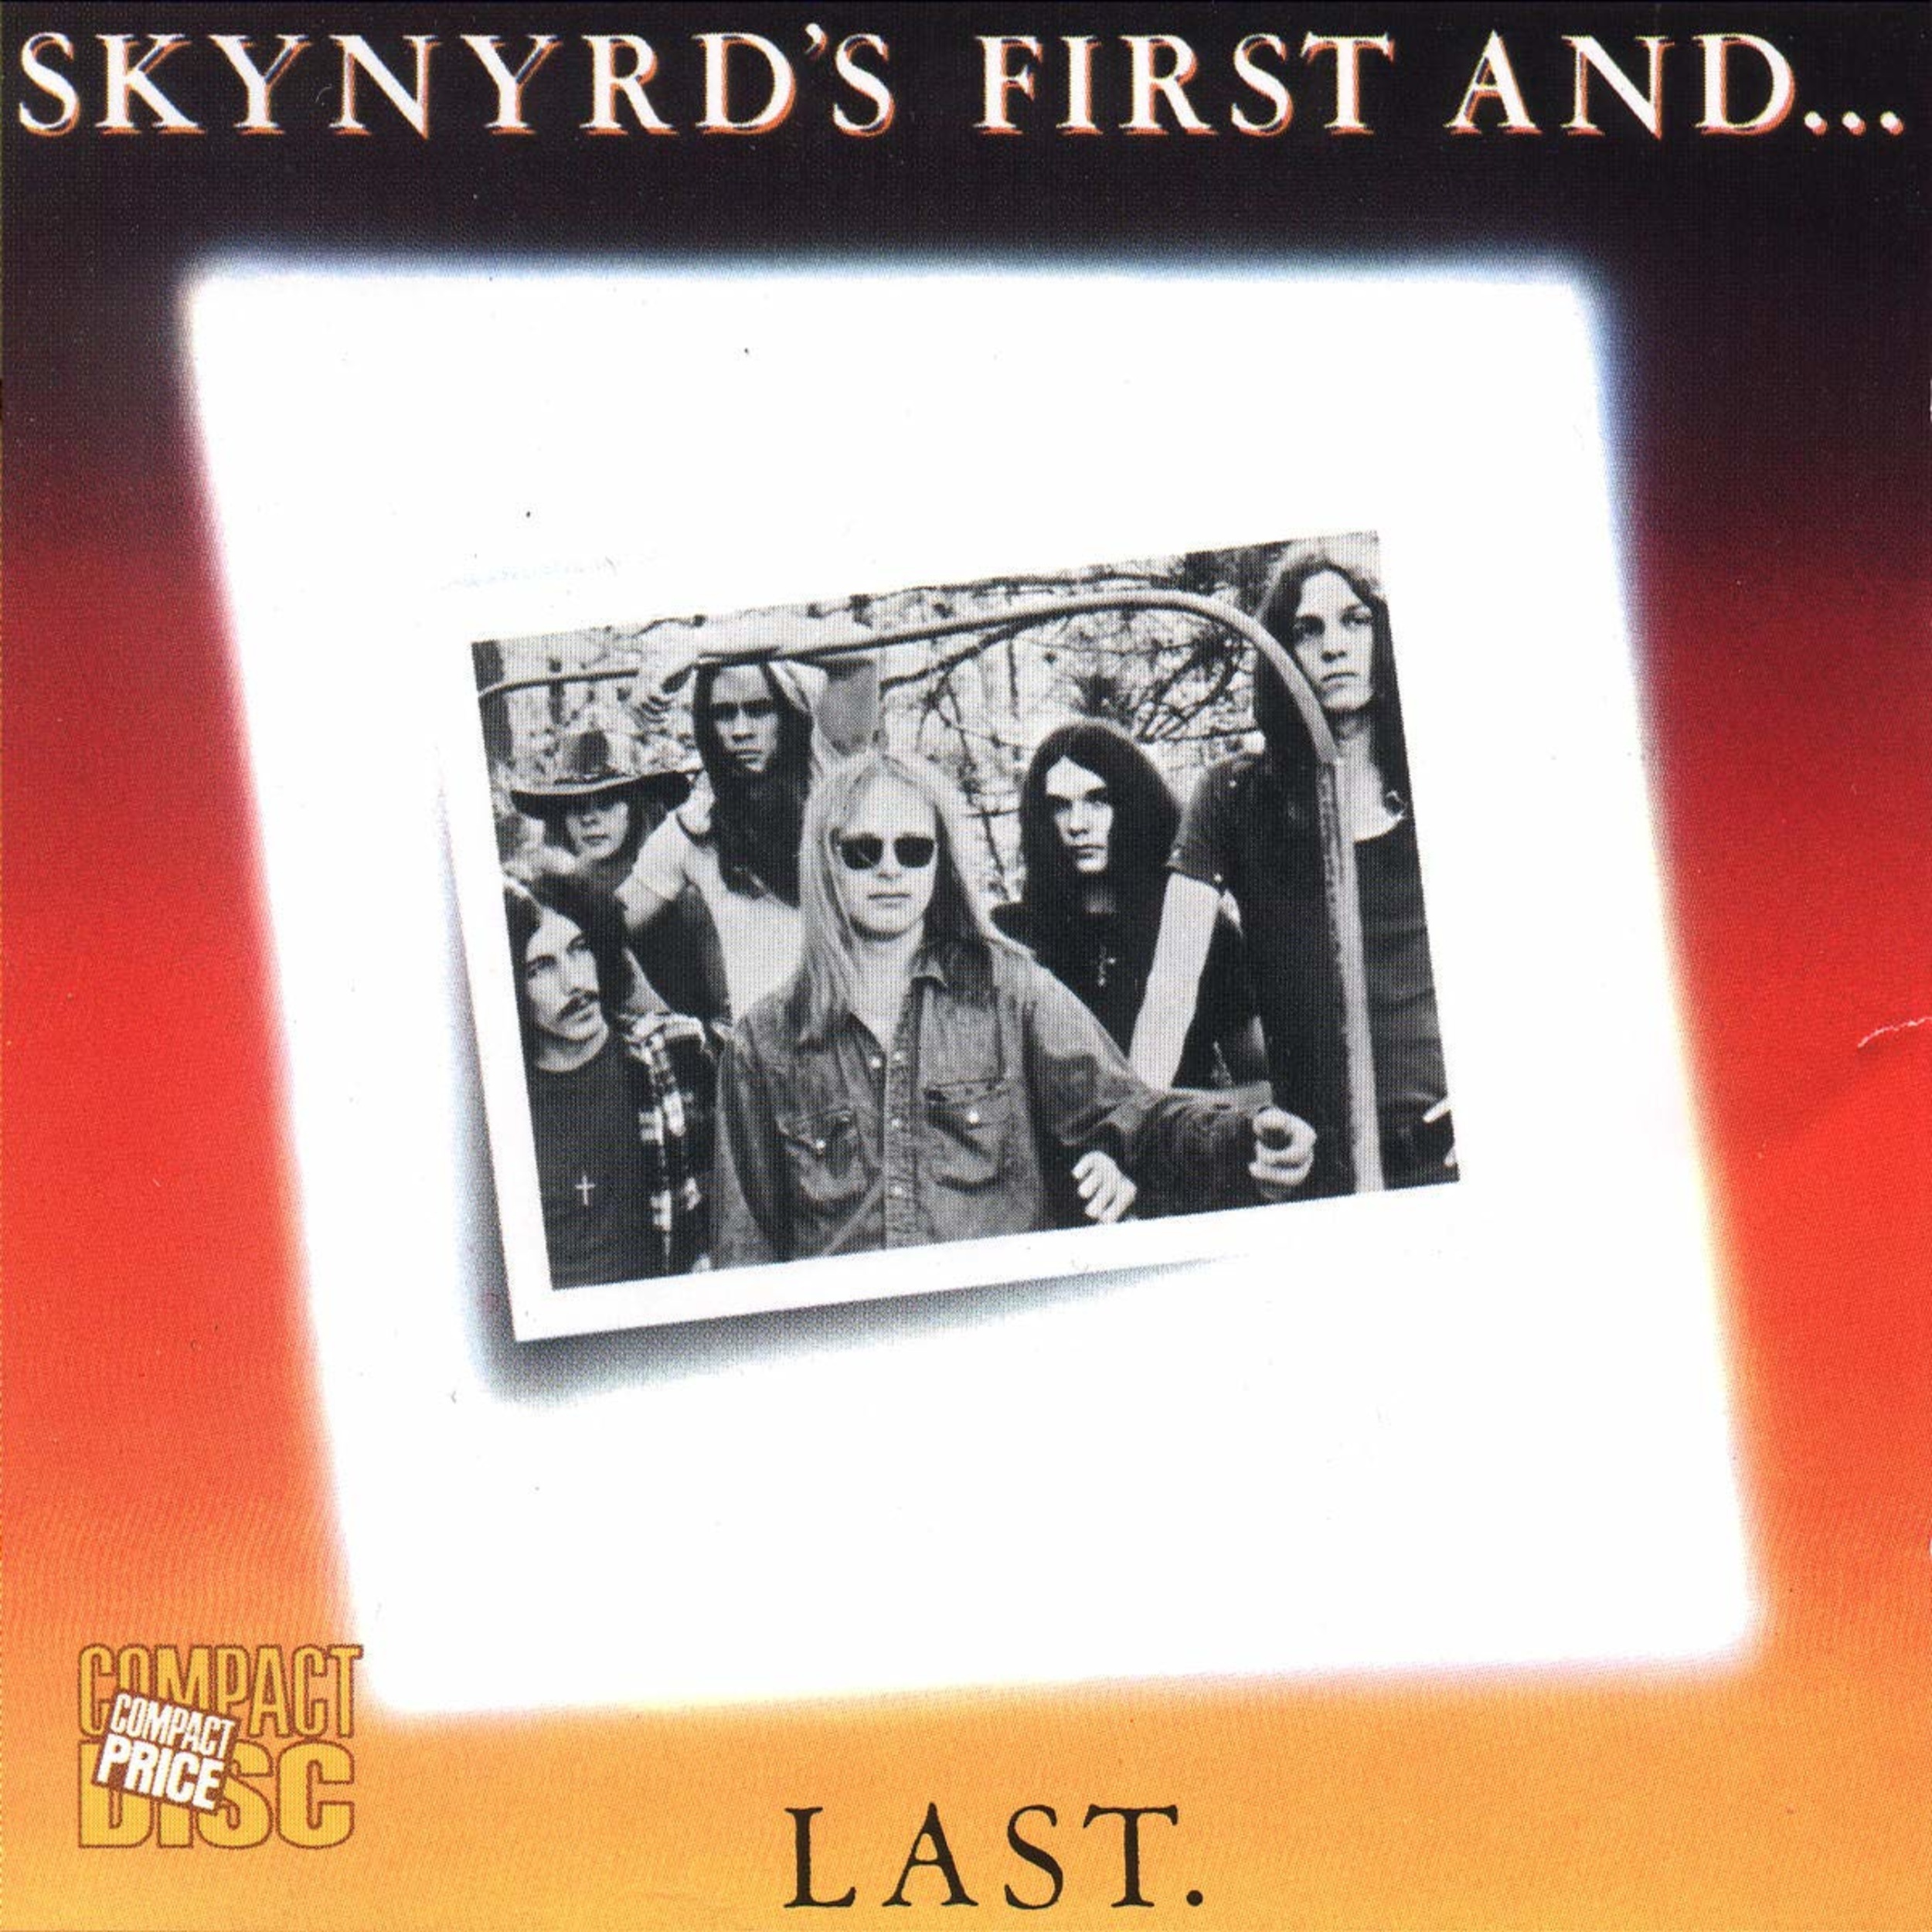 <p>A bittersweet track to say the least. The song was part of <em>Skynyrd's First and...Last, </em>the compilation album released in 1978, following the tragic plane crash. Most of the songs on the album were written and recorded in the early 1970s. "<a href="https://www.youtube.com/watch?v=Ro4_u0DtFaI">Comin' Home</a>" is arguably the highlight of the release. Though an uptempo number, listening to it knowing band members Ronnie Van Zant and Steve Gaines, plus Gaines' sister Cassie, a back-up singer for the band, were gone, made the moment tough to take.</p><p>You may also like: <a href='https://www.yardbarker.com/entertainment/articles/the_25_most_political_bands_040824/s1__32785829'>The 25 most political bands</a></p>